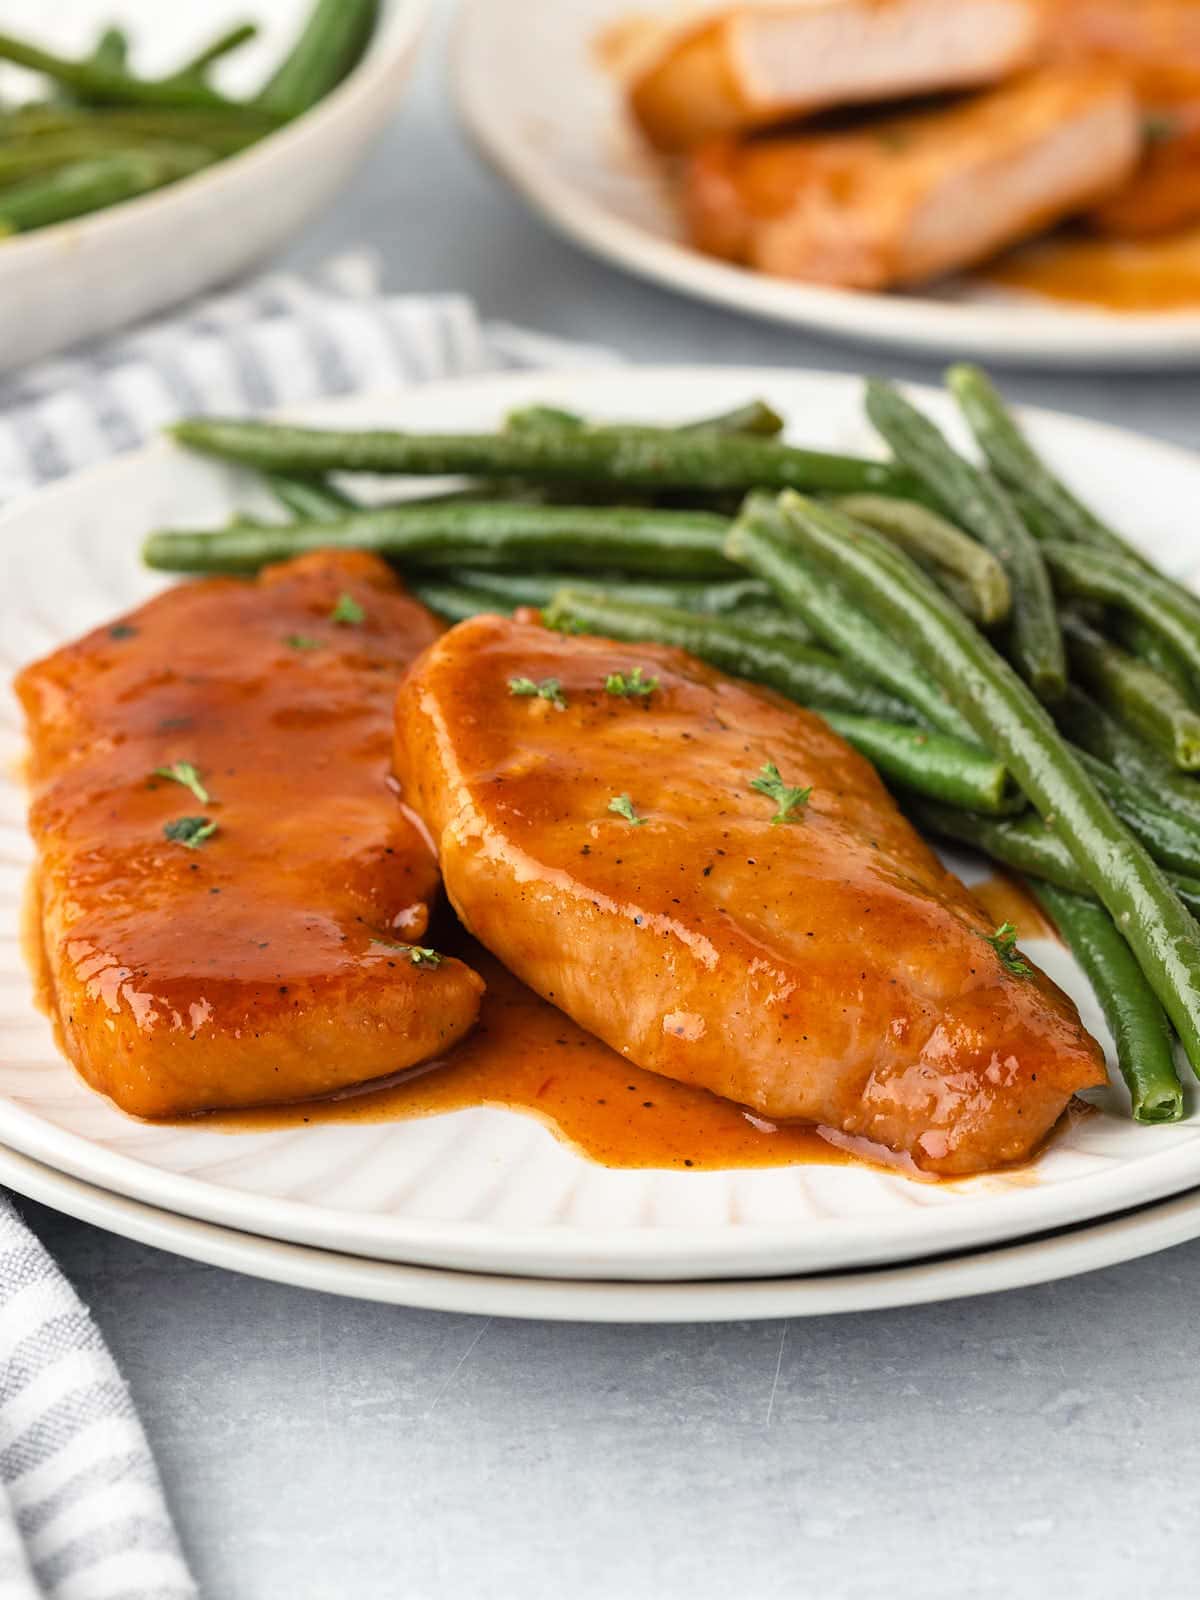 Pork chops on a plate with green beans.